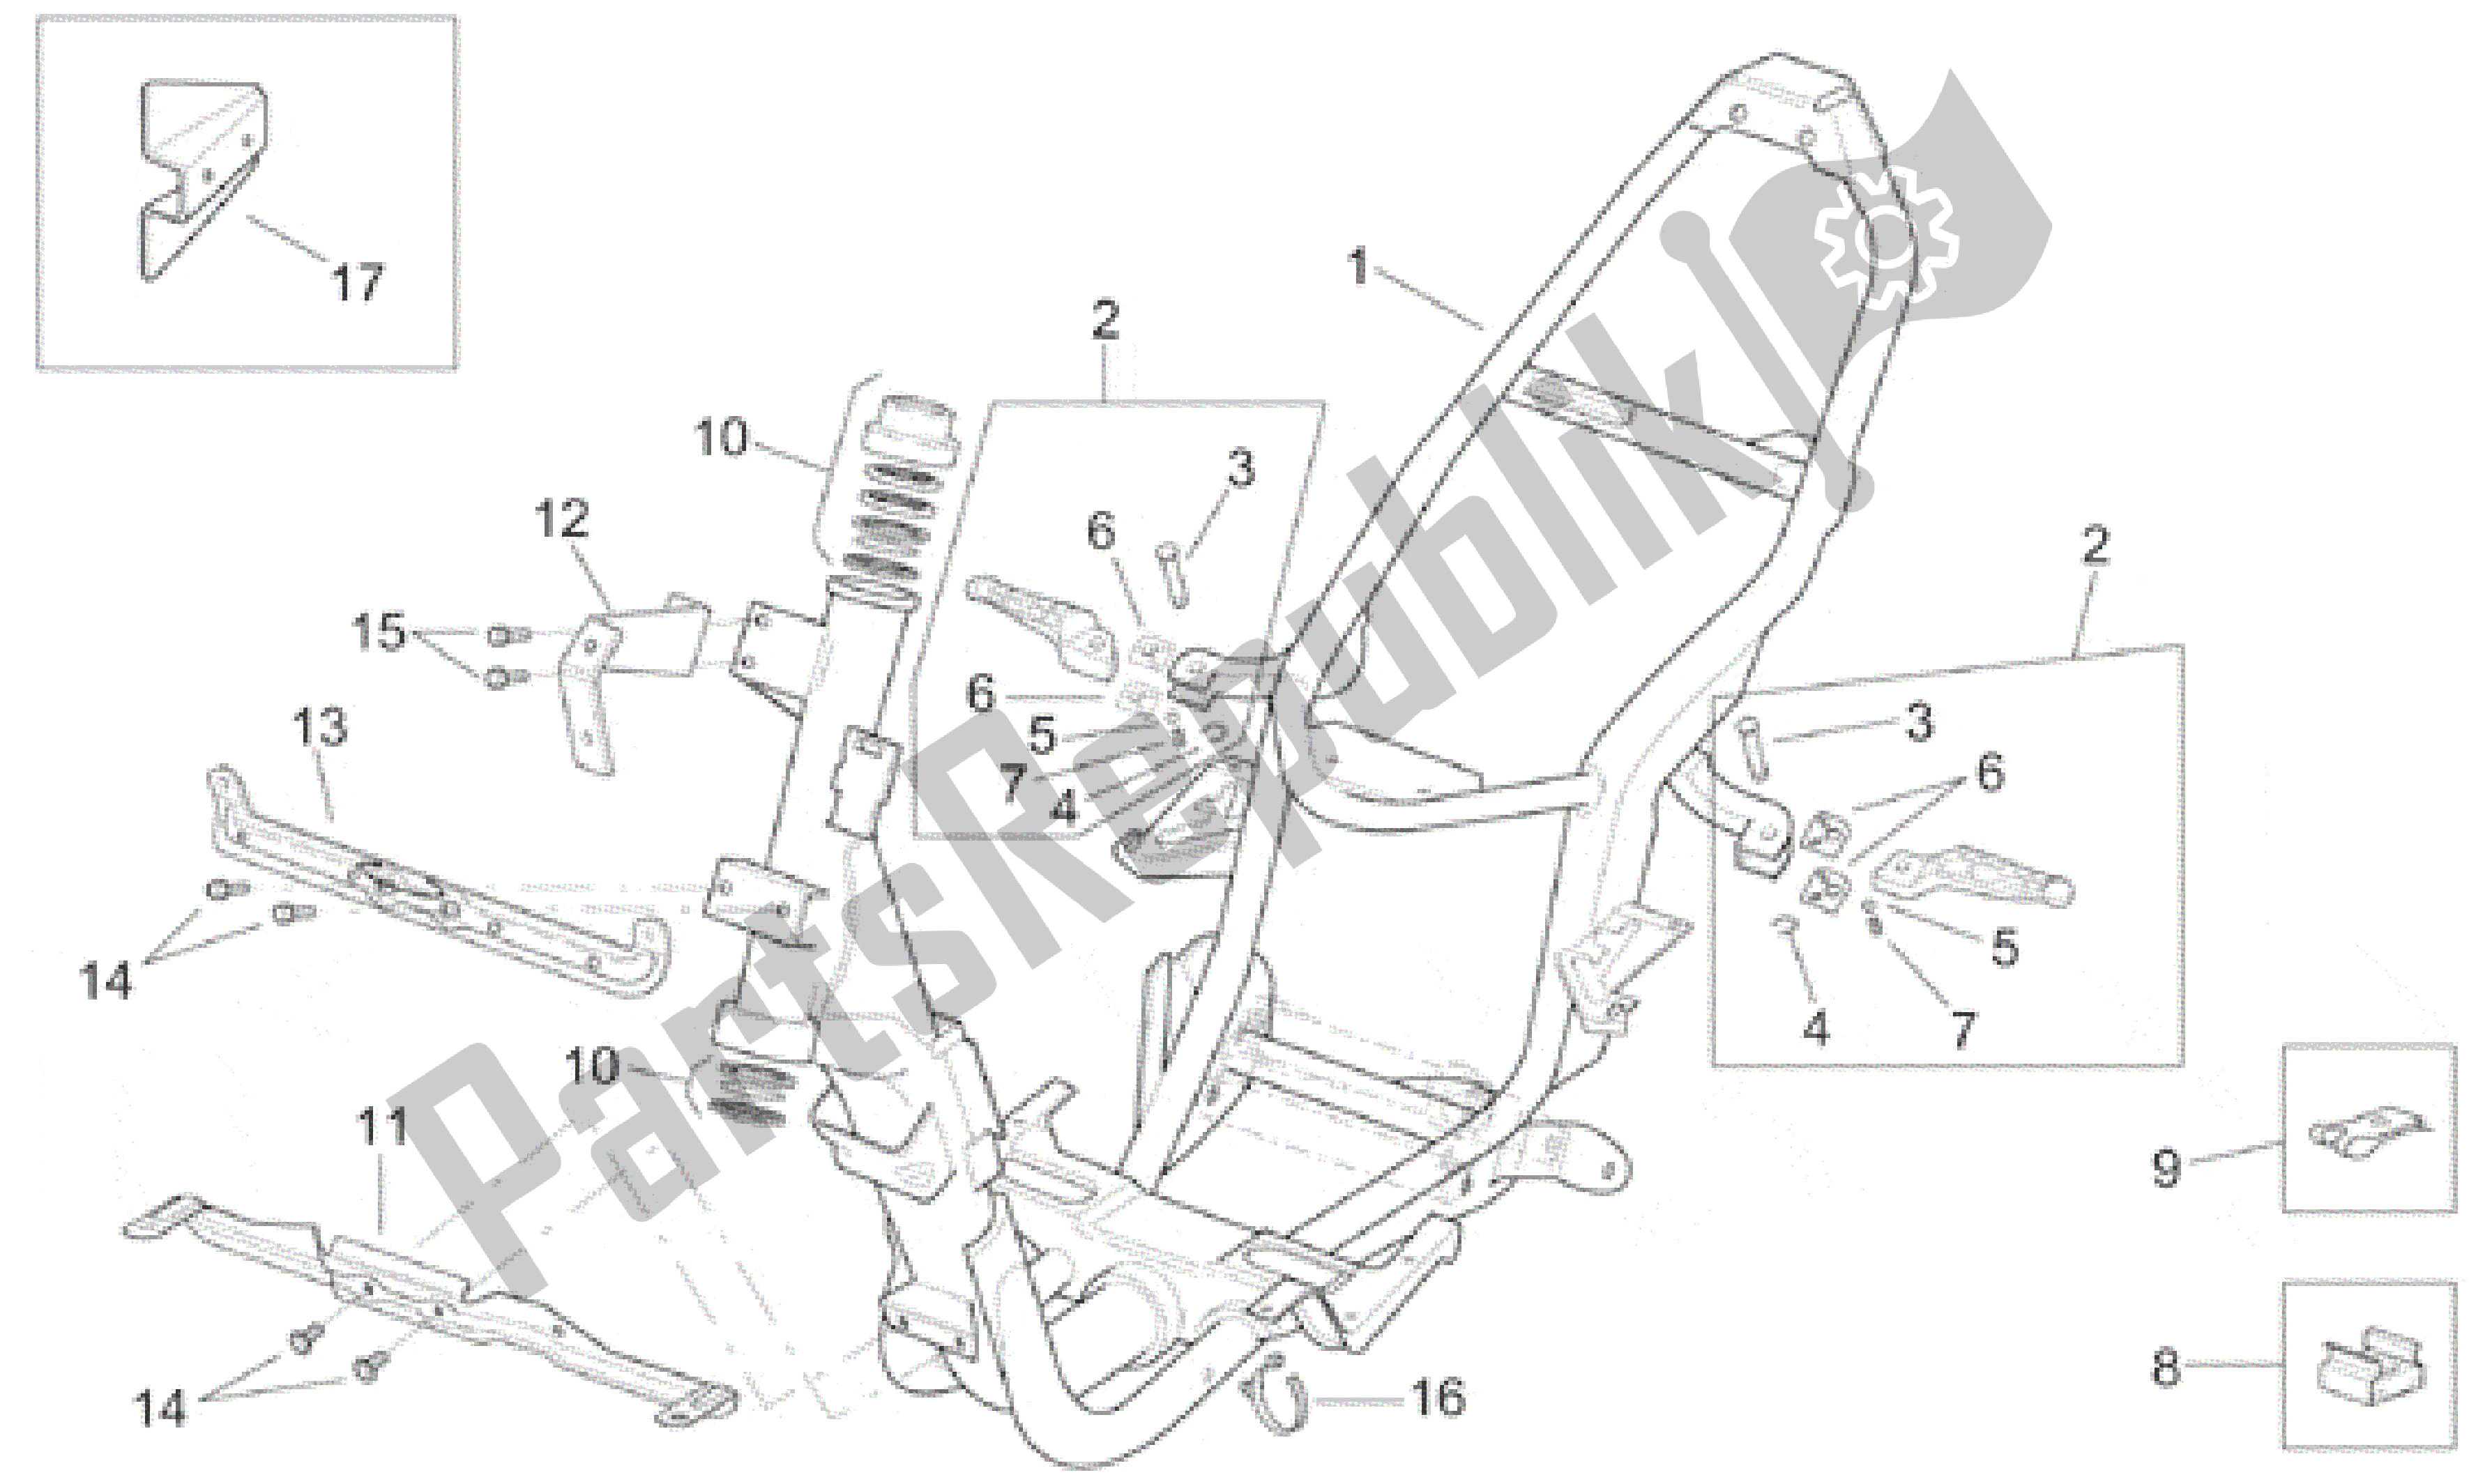 All parts for the Frame of the Aprilia SR 125 1999 - 2001